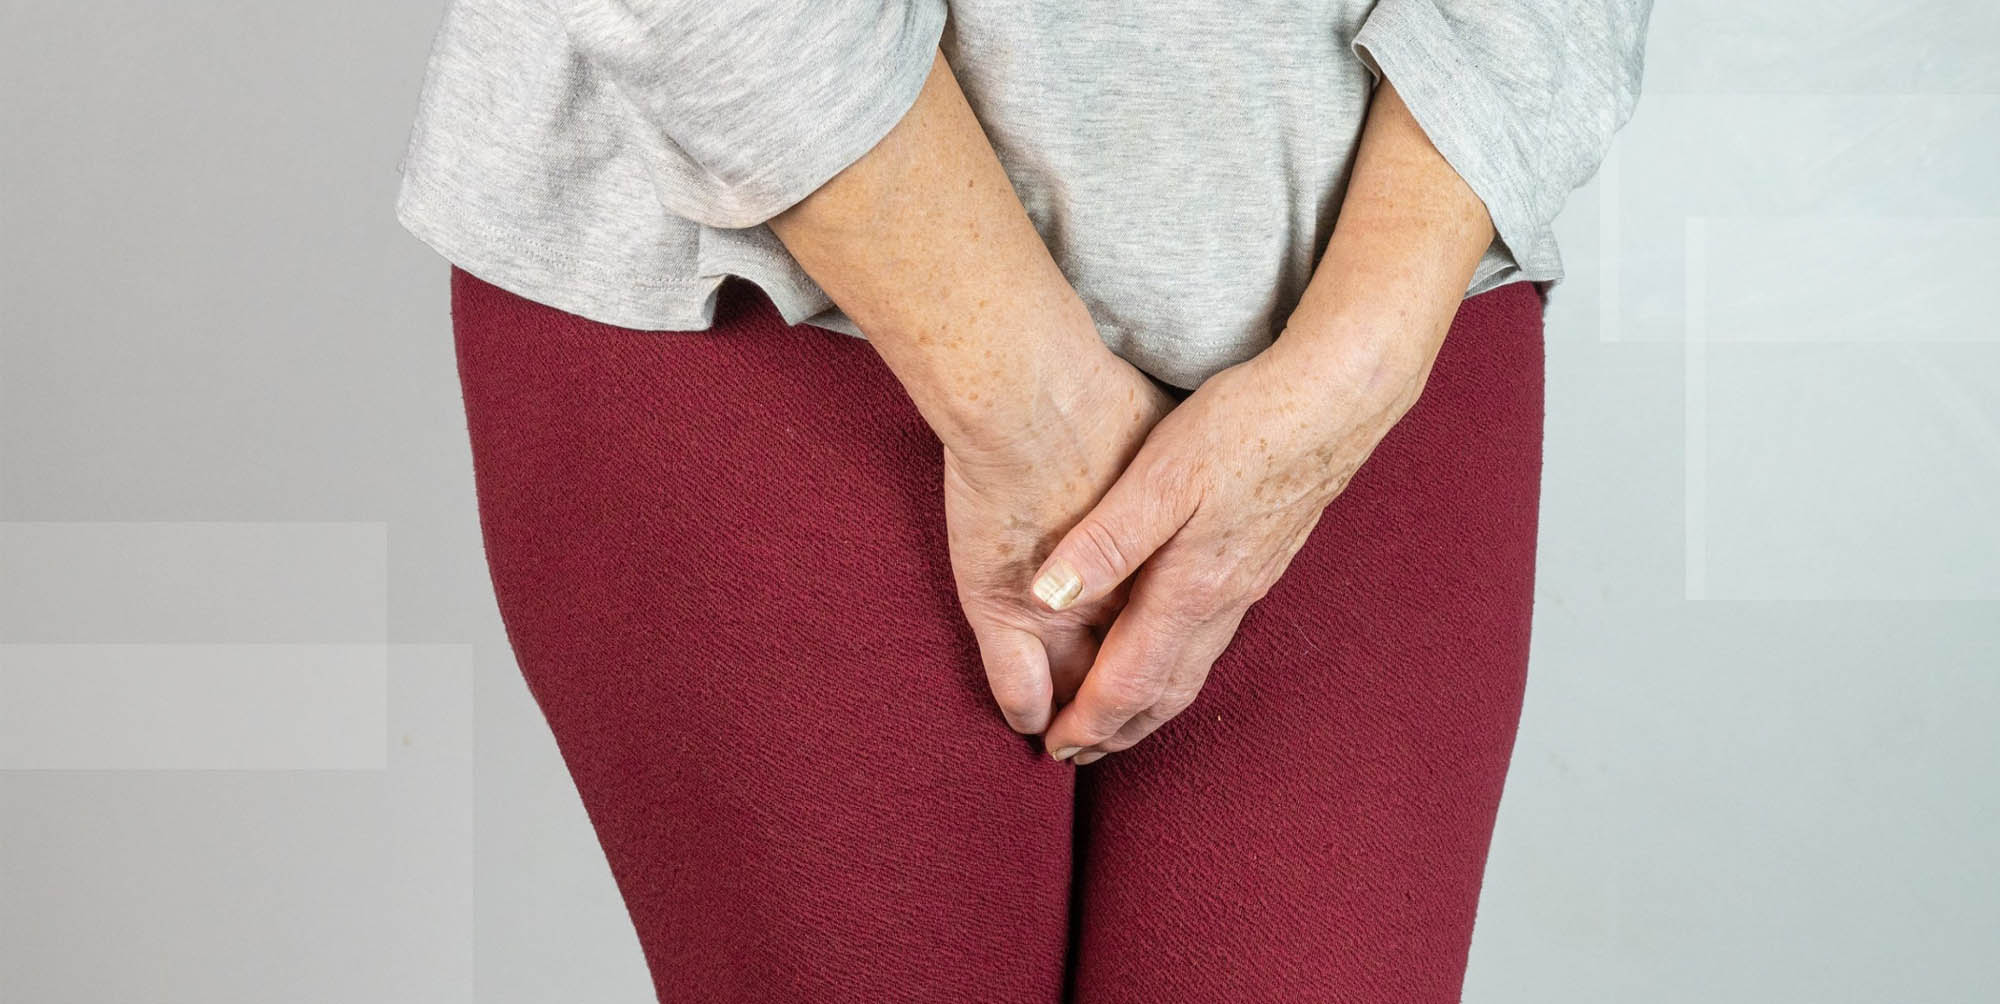 Incontinent woman holding herself continence management